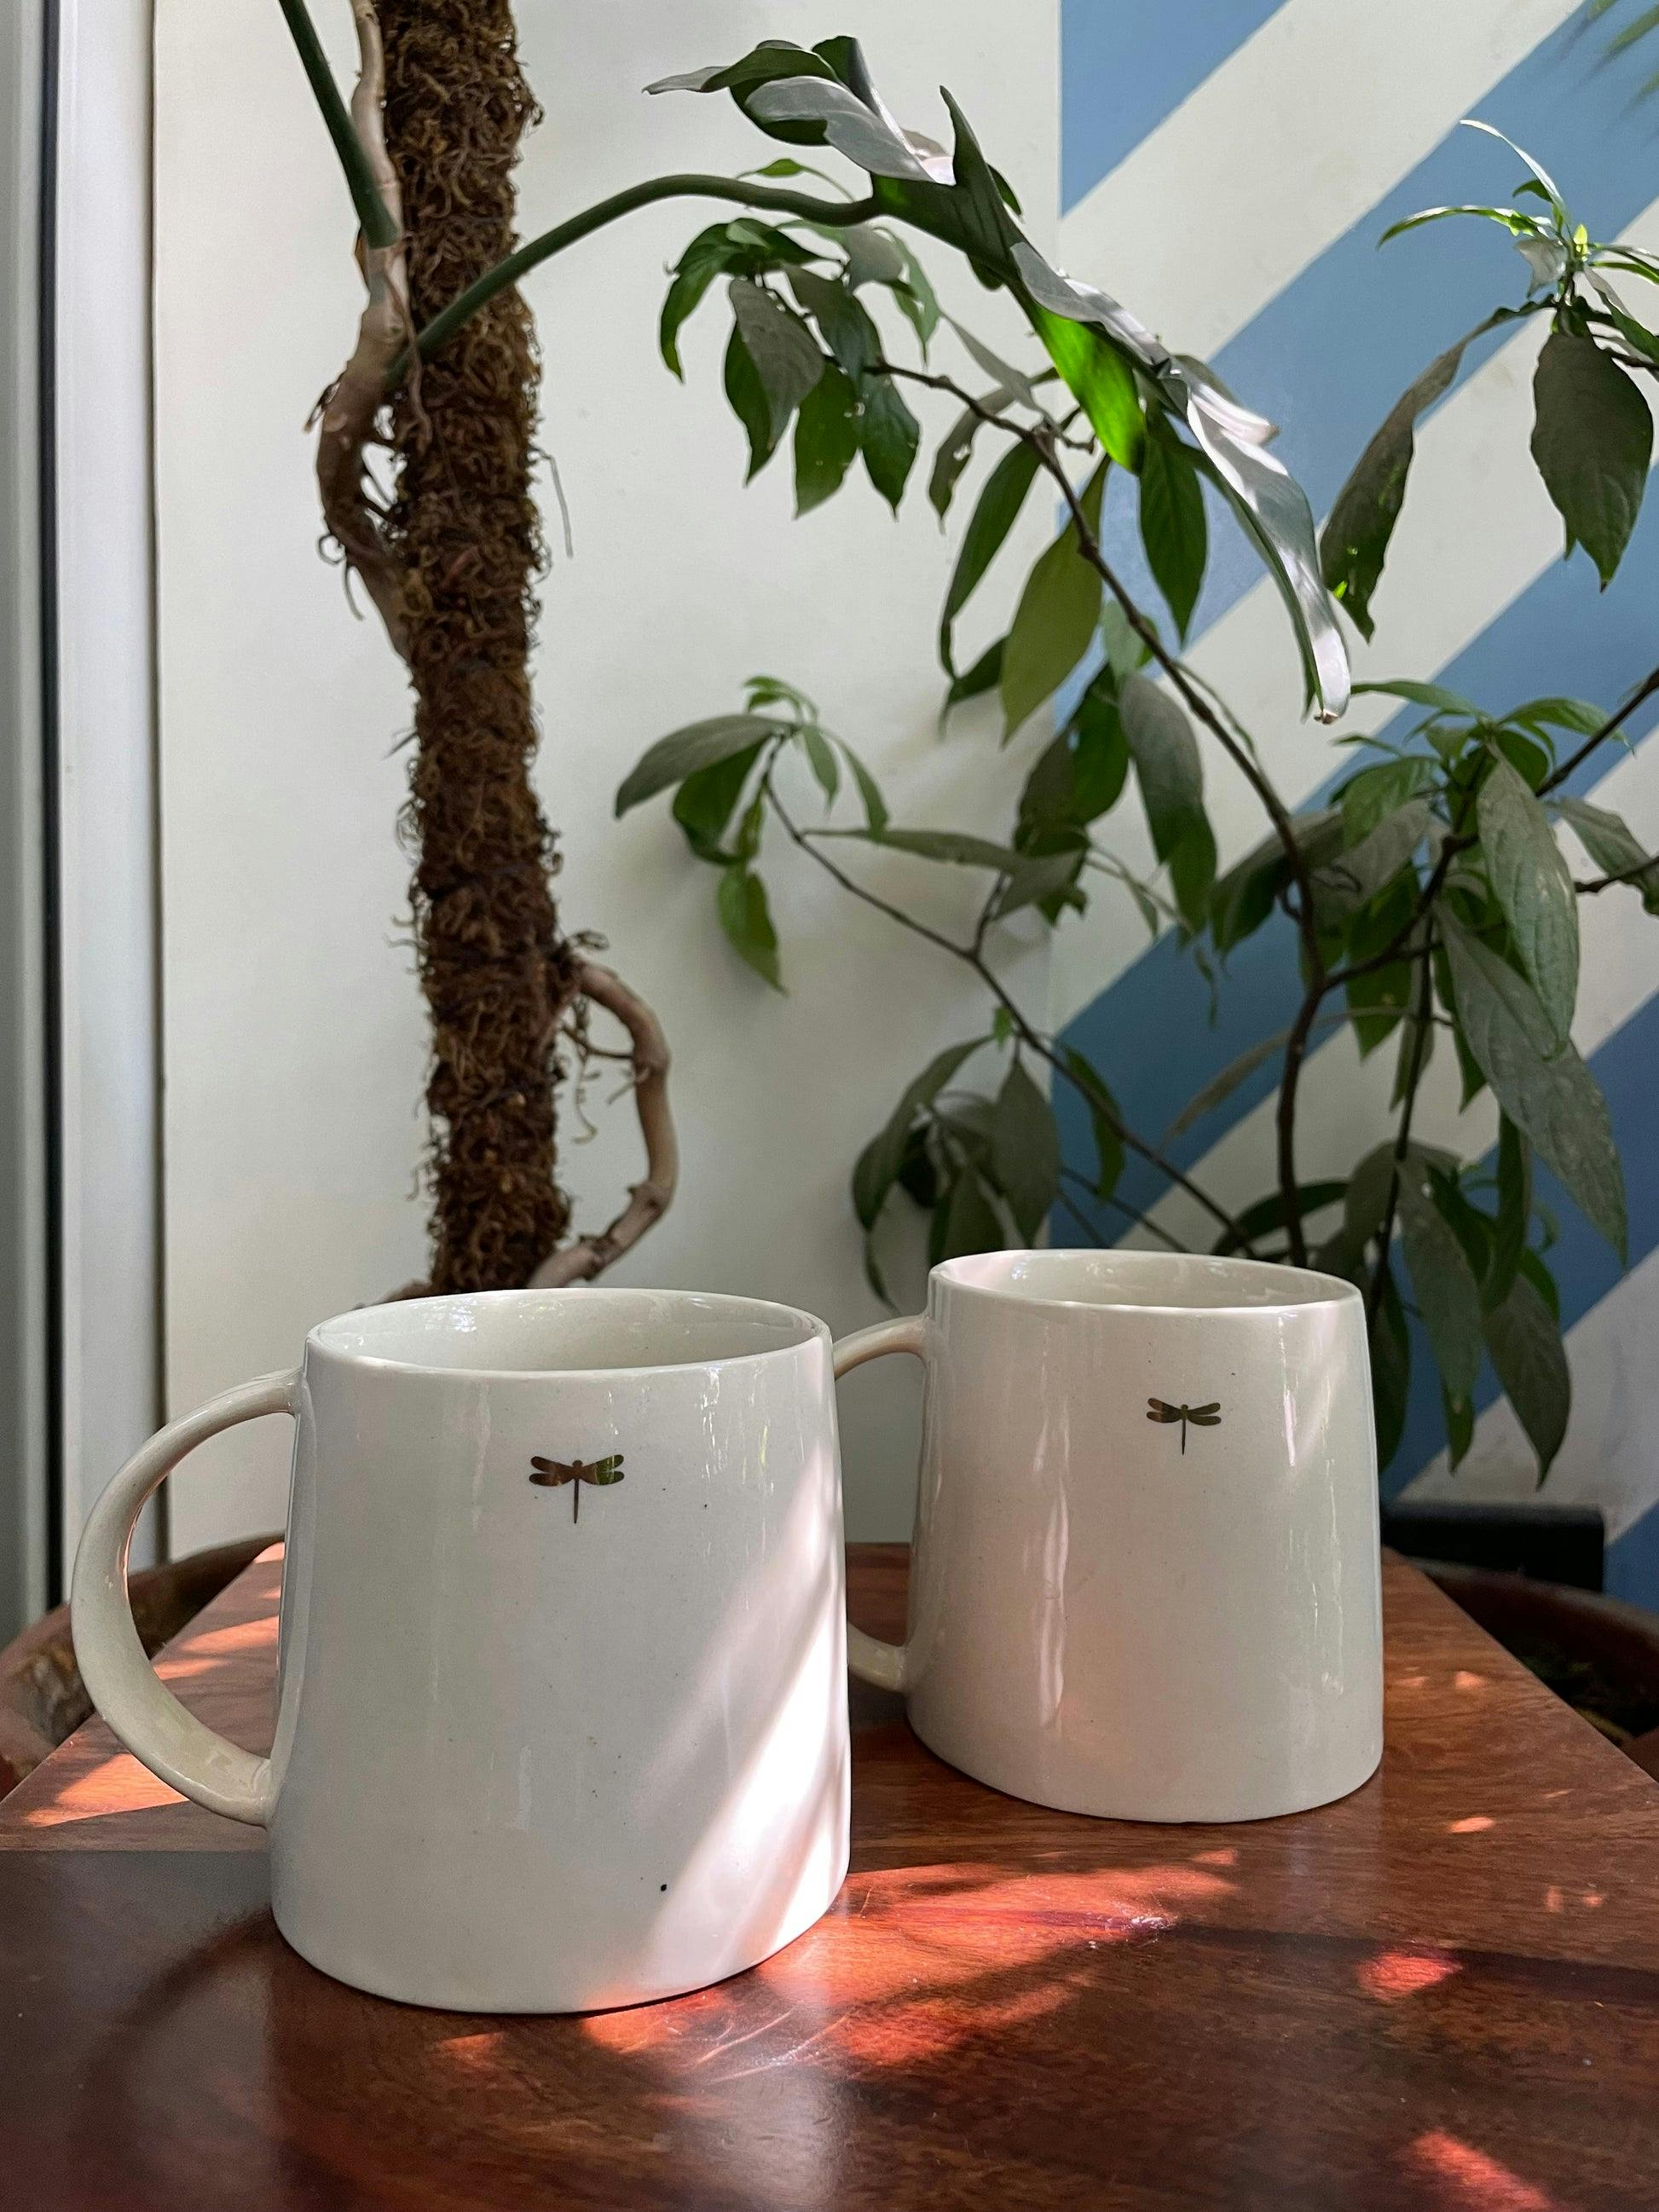 Dragonfly Gilt Mug - Set of 2, a product by Oh Yay project